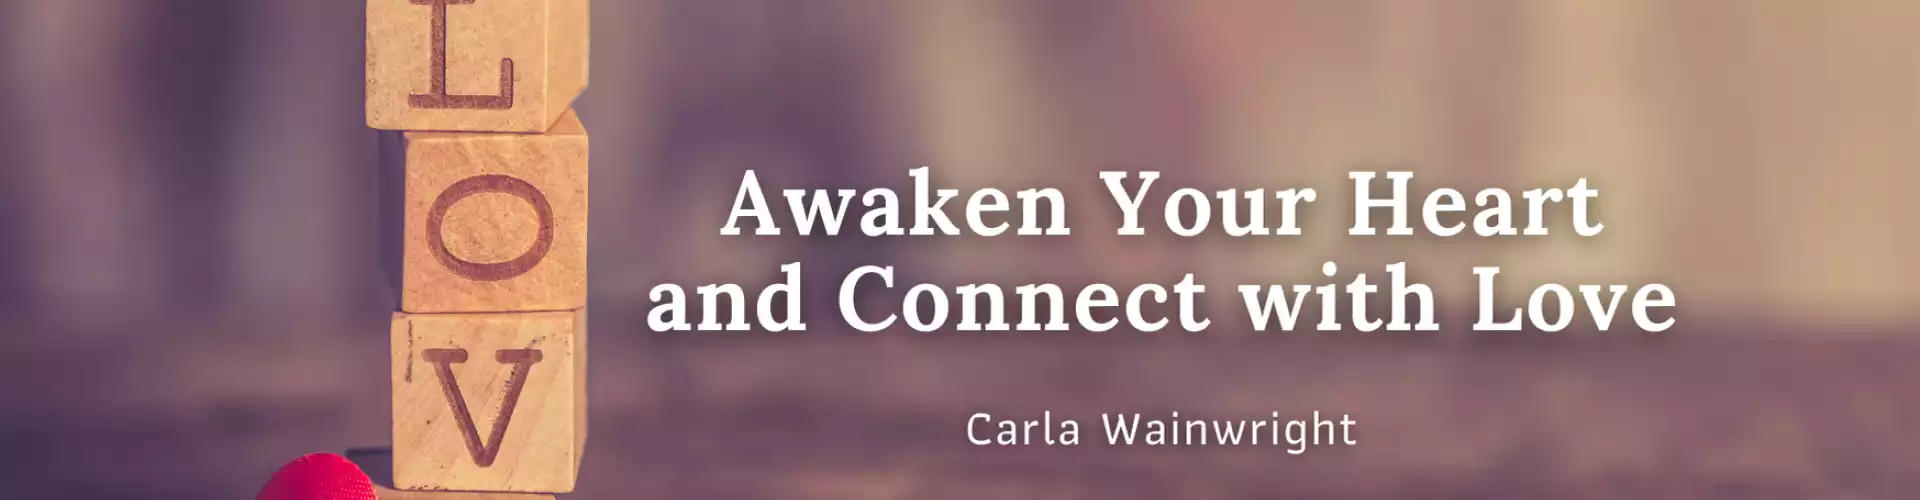 Awaken Your Heart and Connect with Love